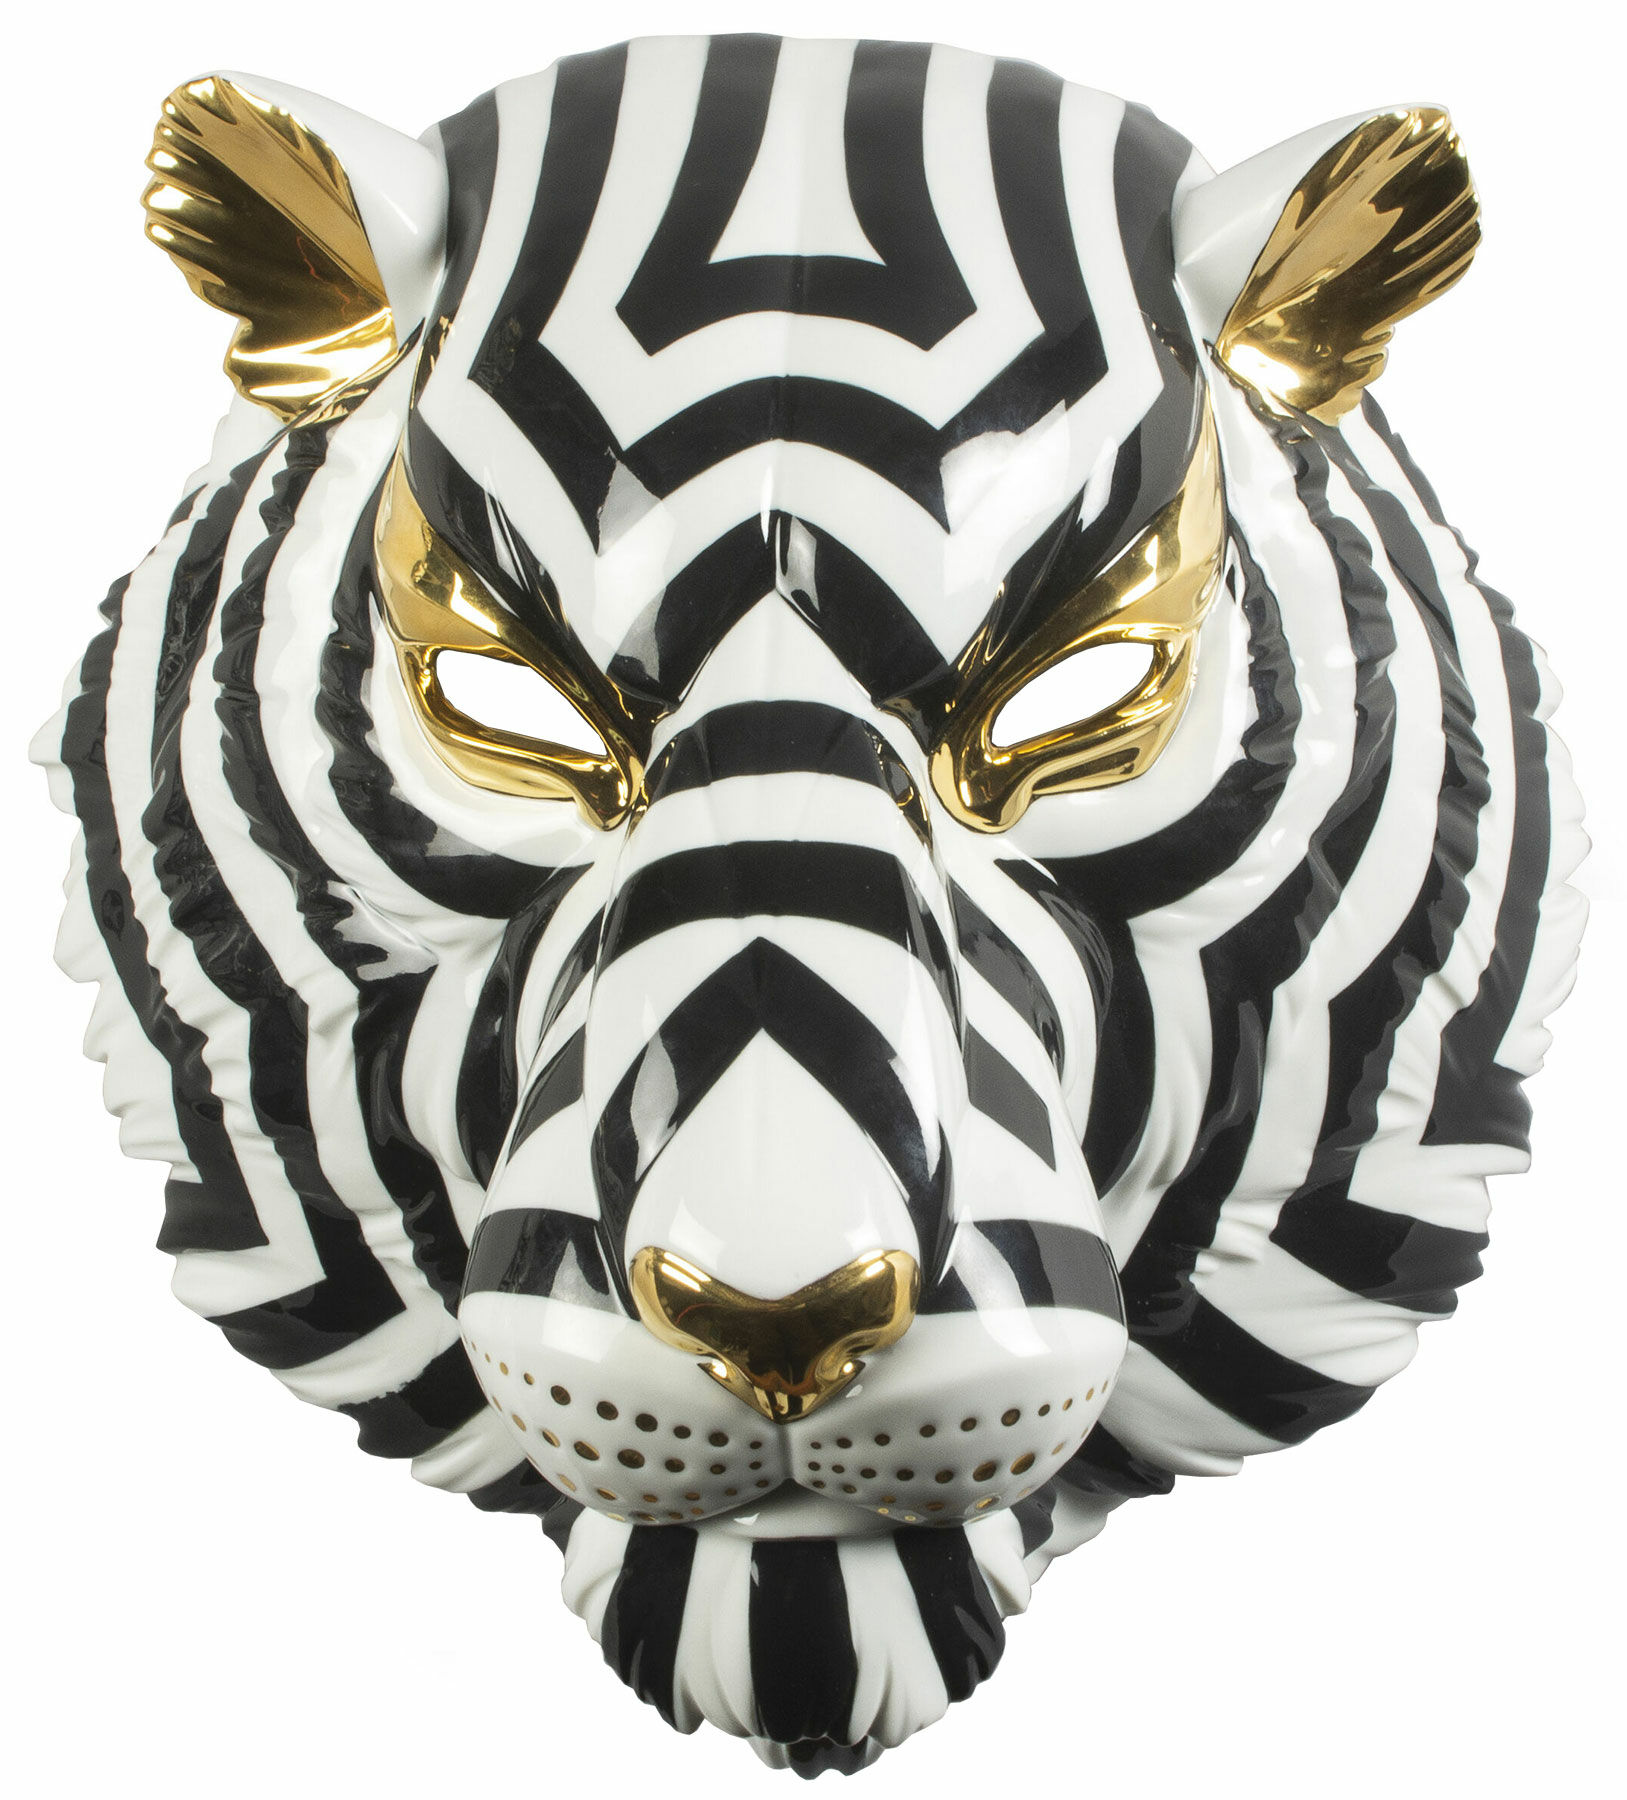 Wall object "Tiger Mask Black and Gold", porcelain by Lladró